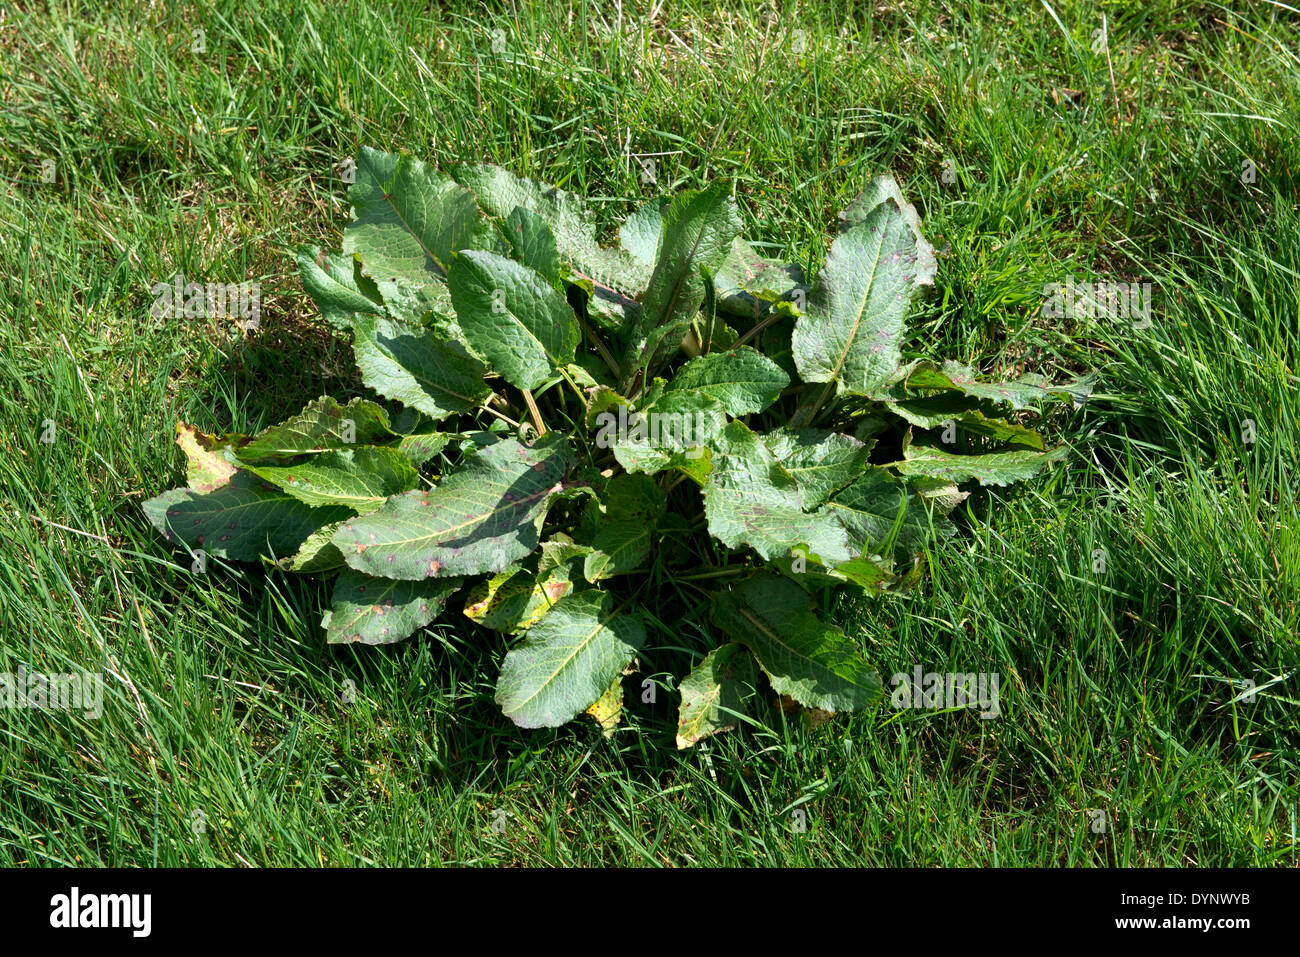 A broad dock plant, Rumex obtusifolius, a weed in grass pasture Stock Photo